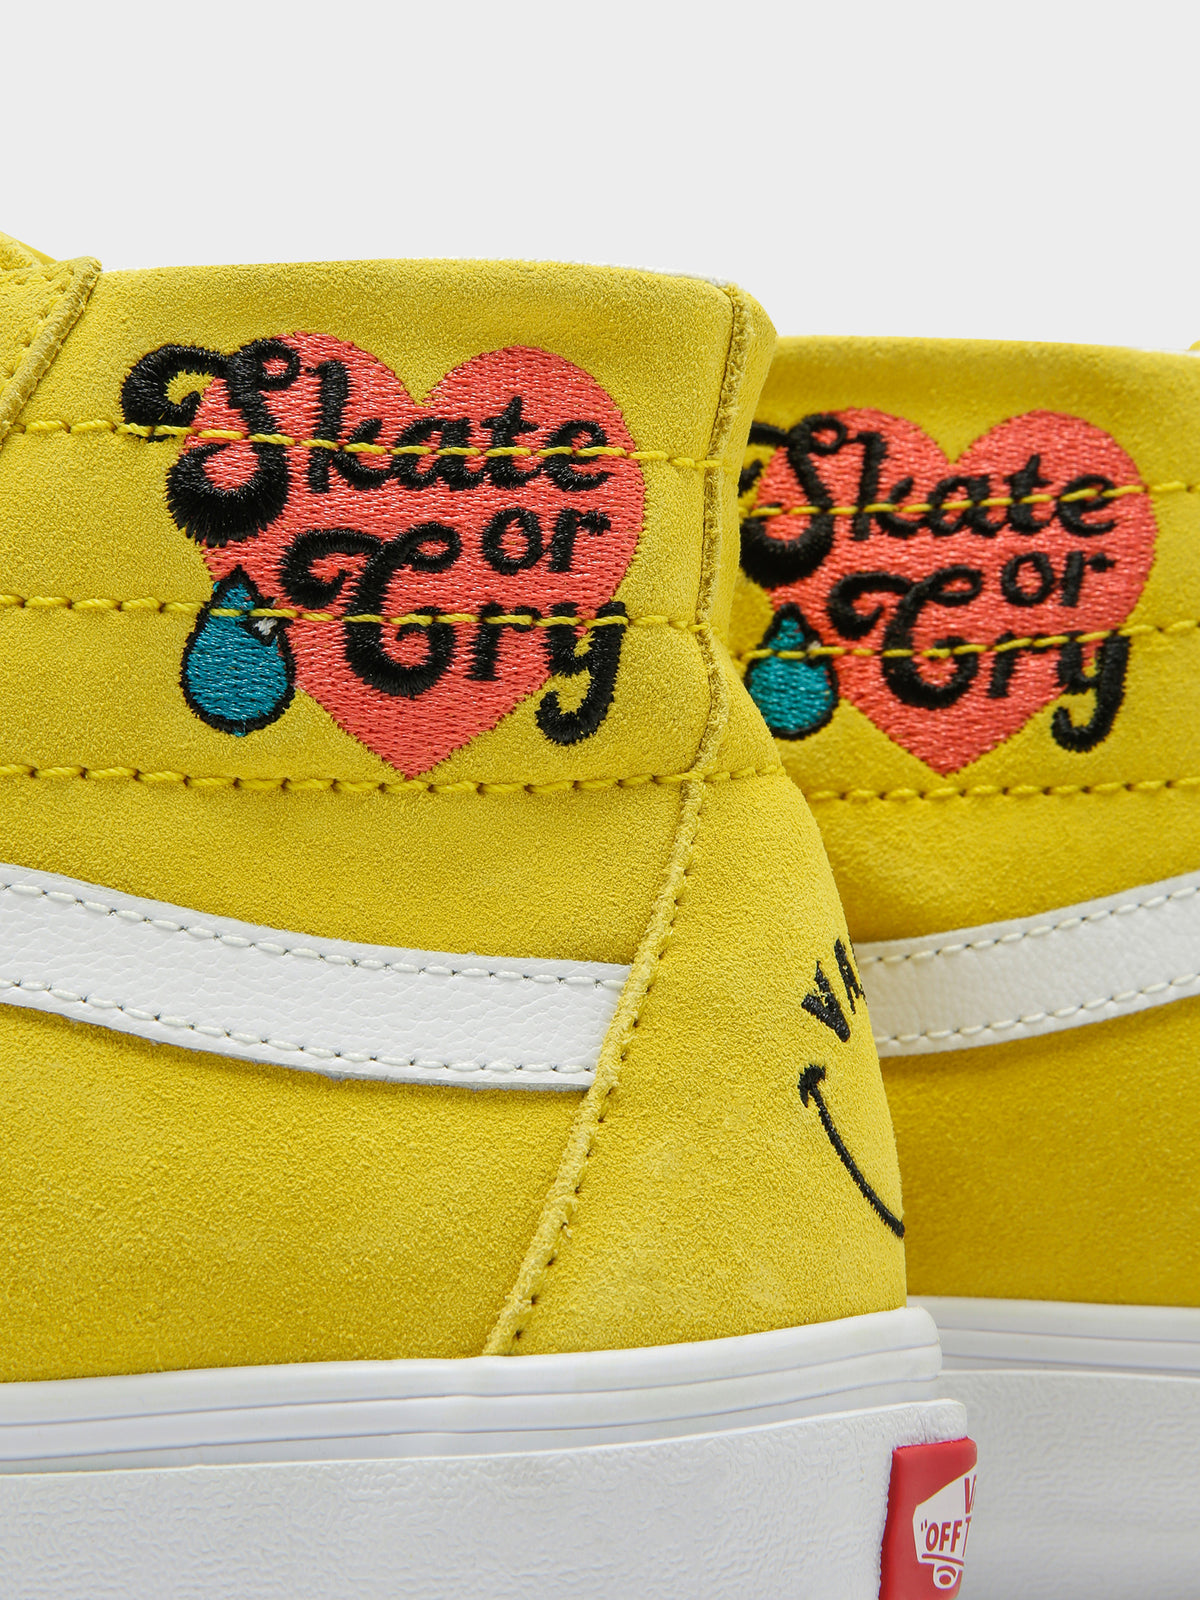 Unisex Sk8-Hi Tapered Sneakers in Radically Happy Yellow